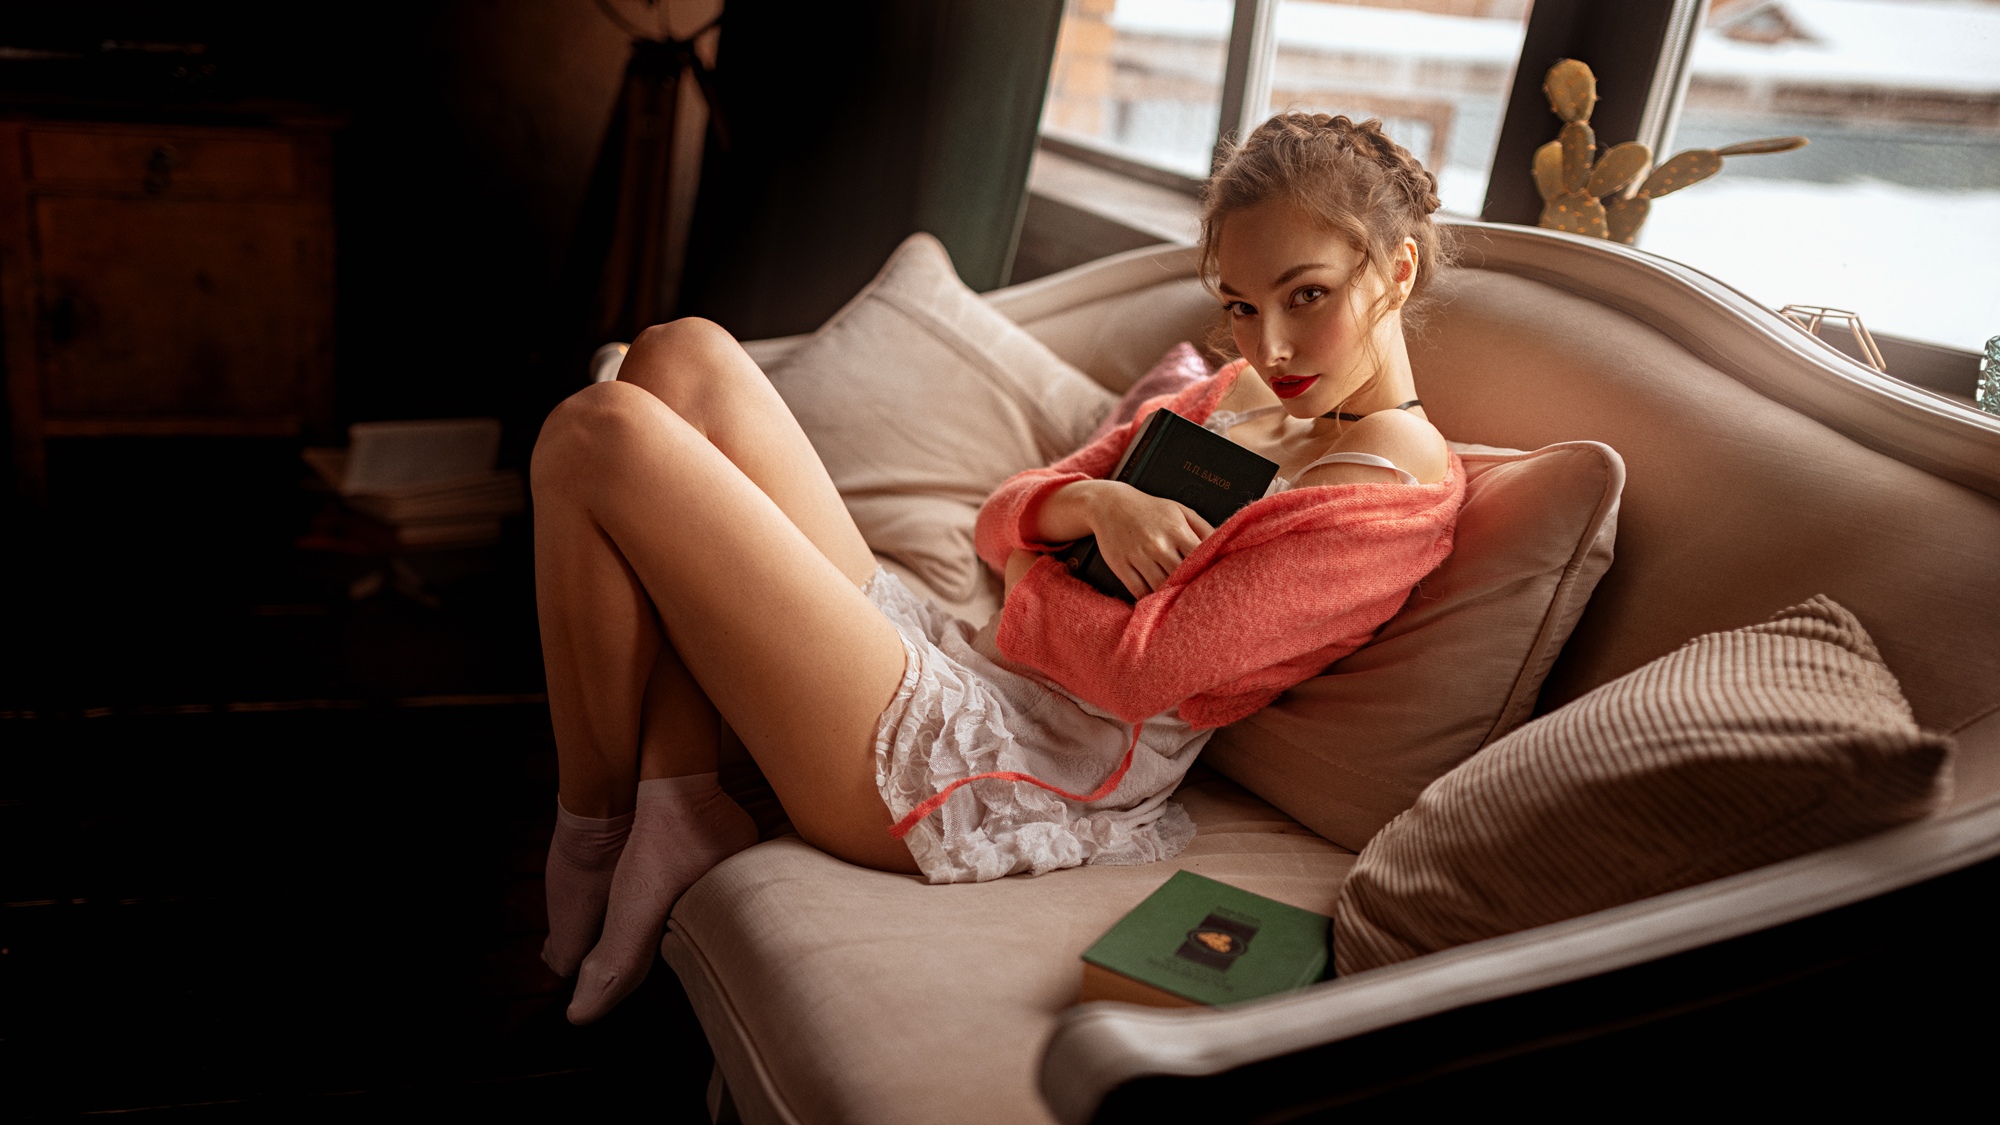 People 2000x1125 women model brunette braids looking at viewer red lipstick sweater pink sweater dress white dress sitting socks white socks books cushions necklace arms crossed side view indoors women indoors Georgy Chernyadyev miniskirt choker legs up collar short socks feet crossed pointed toes bent legs young women